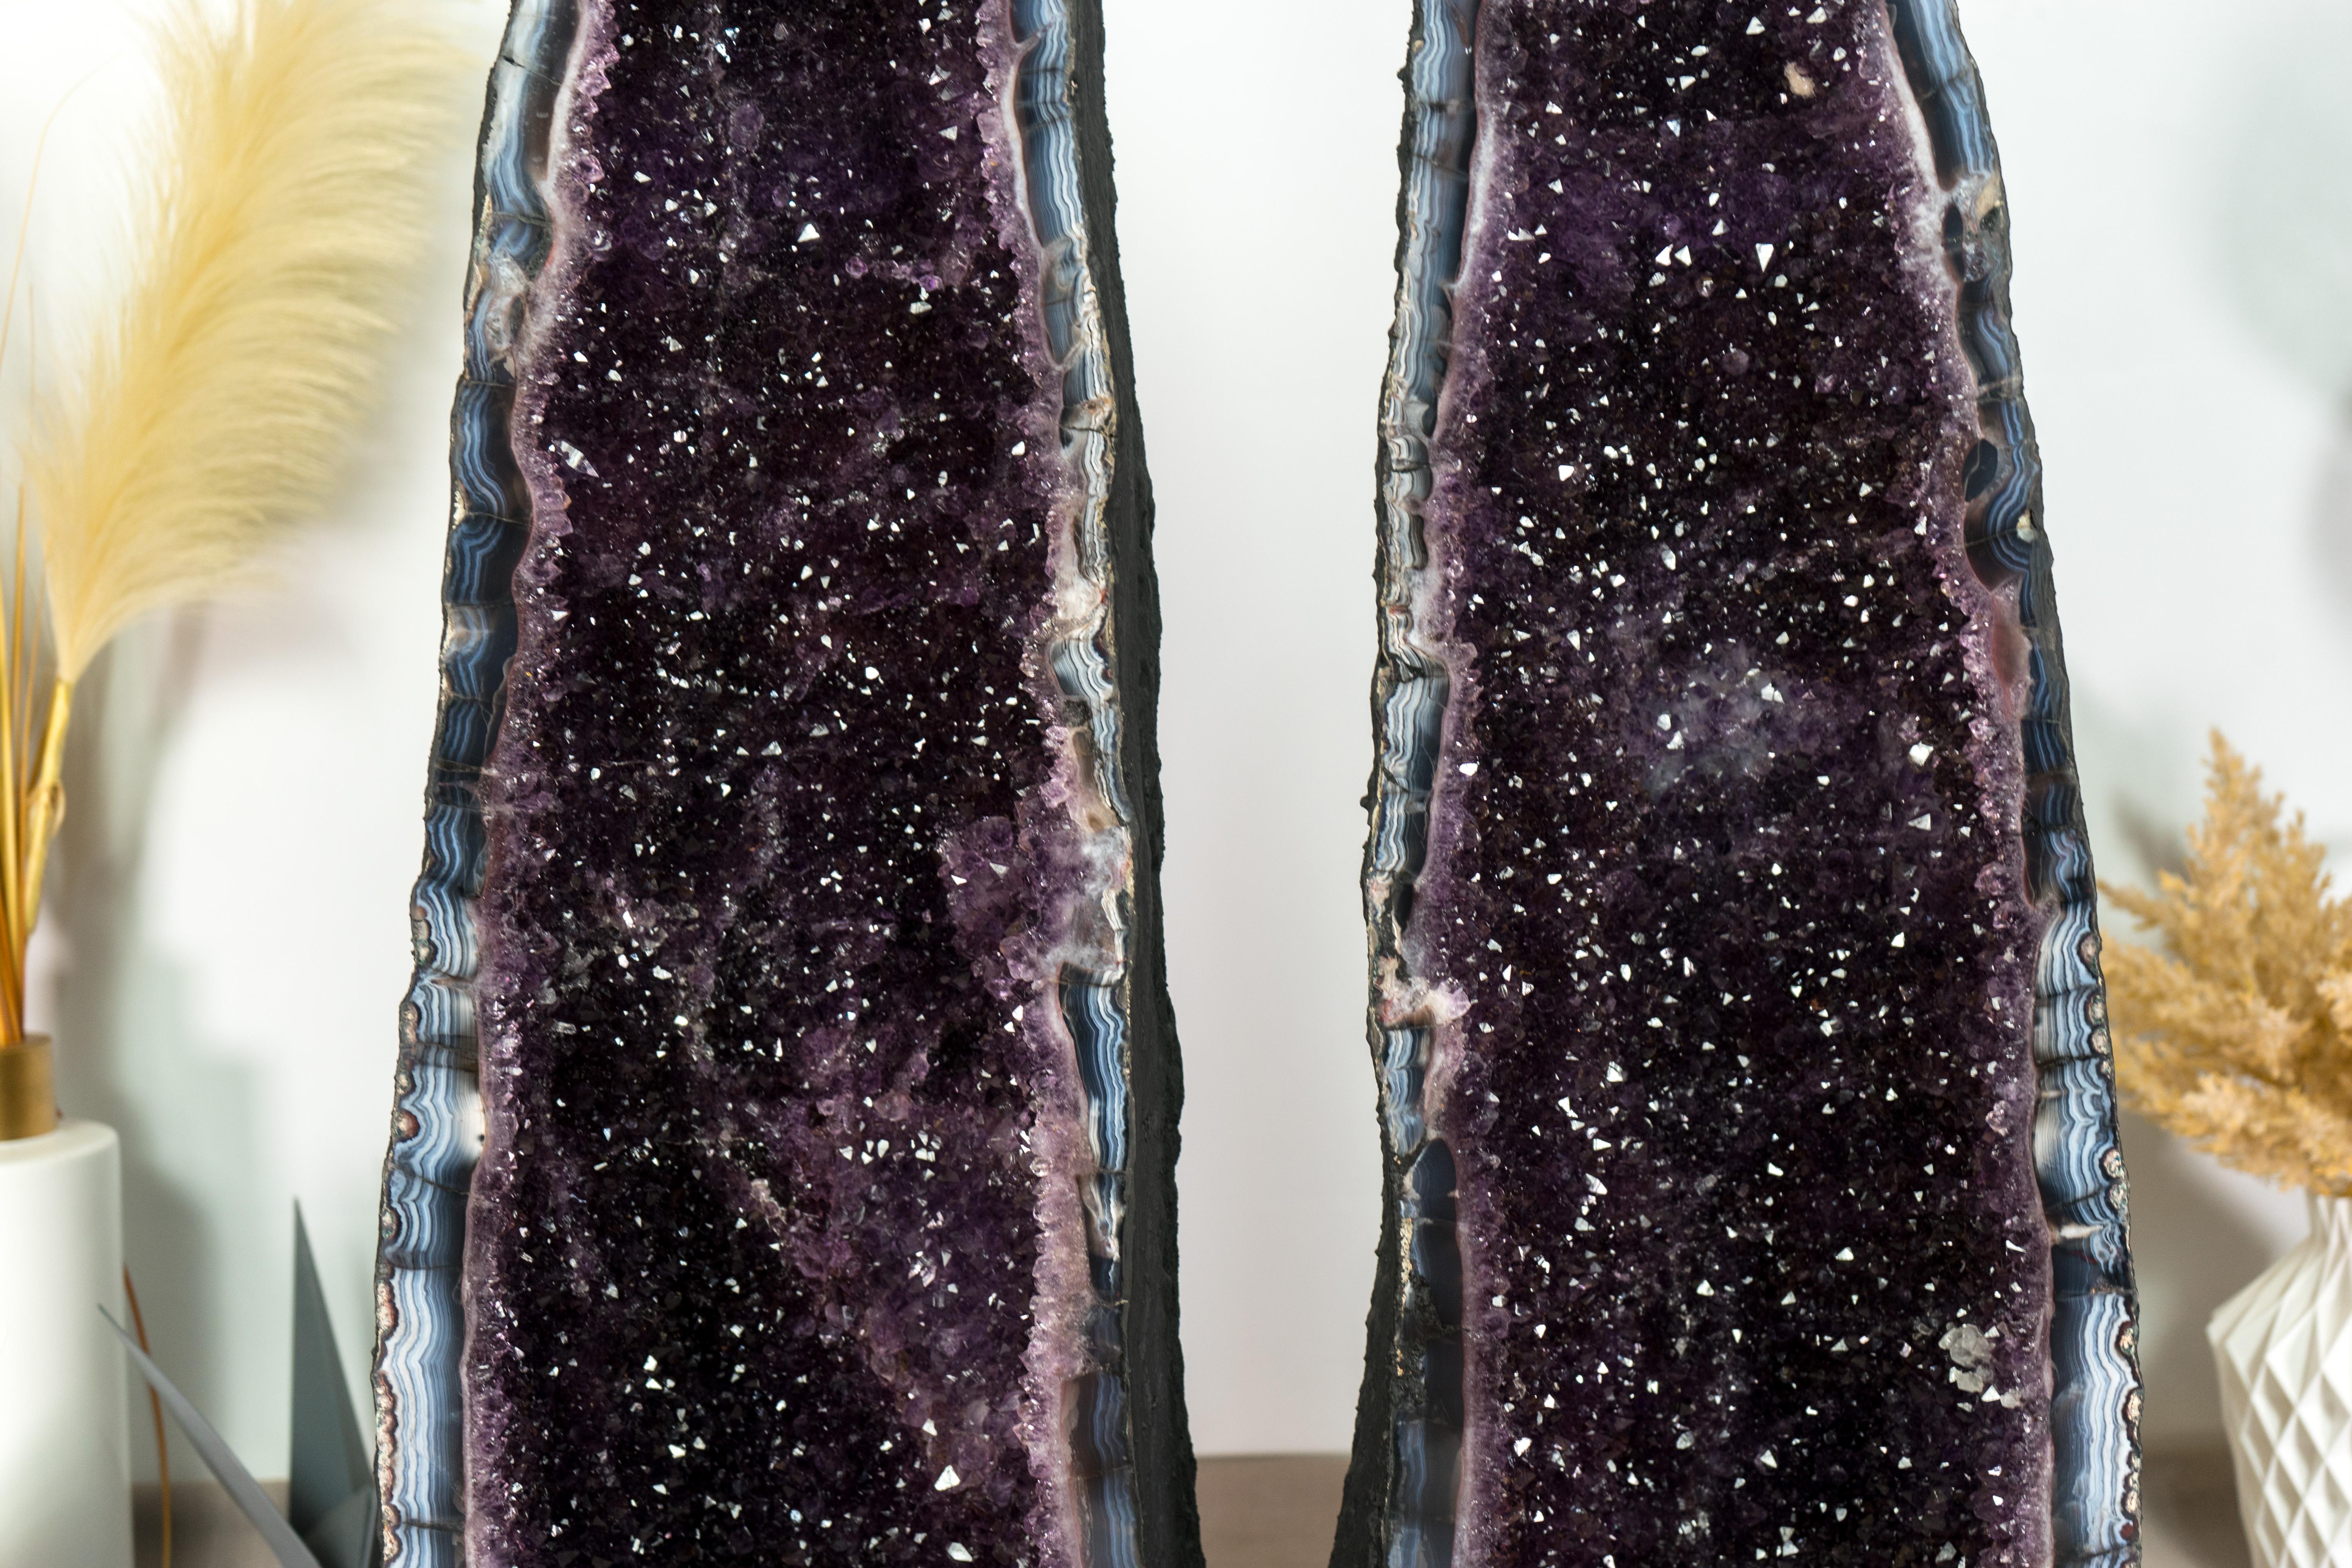 Pair of Amethyst Cathedral Geodes, with Lace Agate, Purple Amethyst, and Calcite For Sale 4